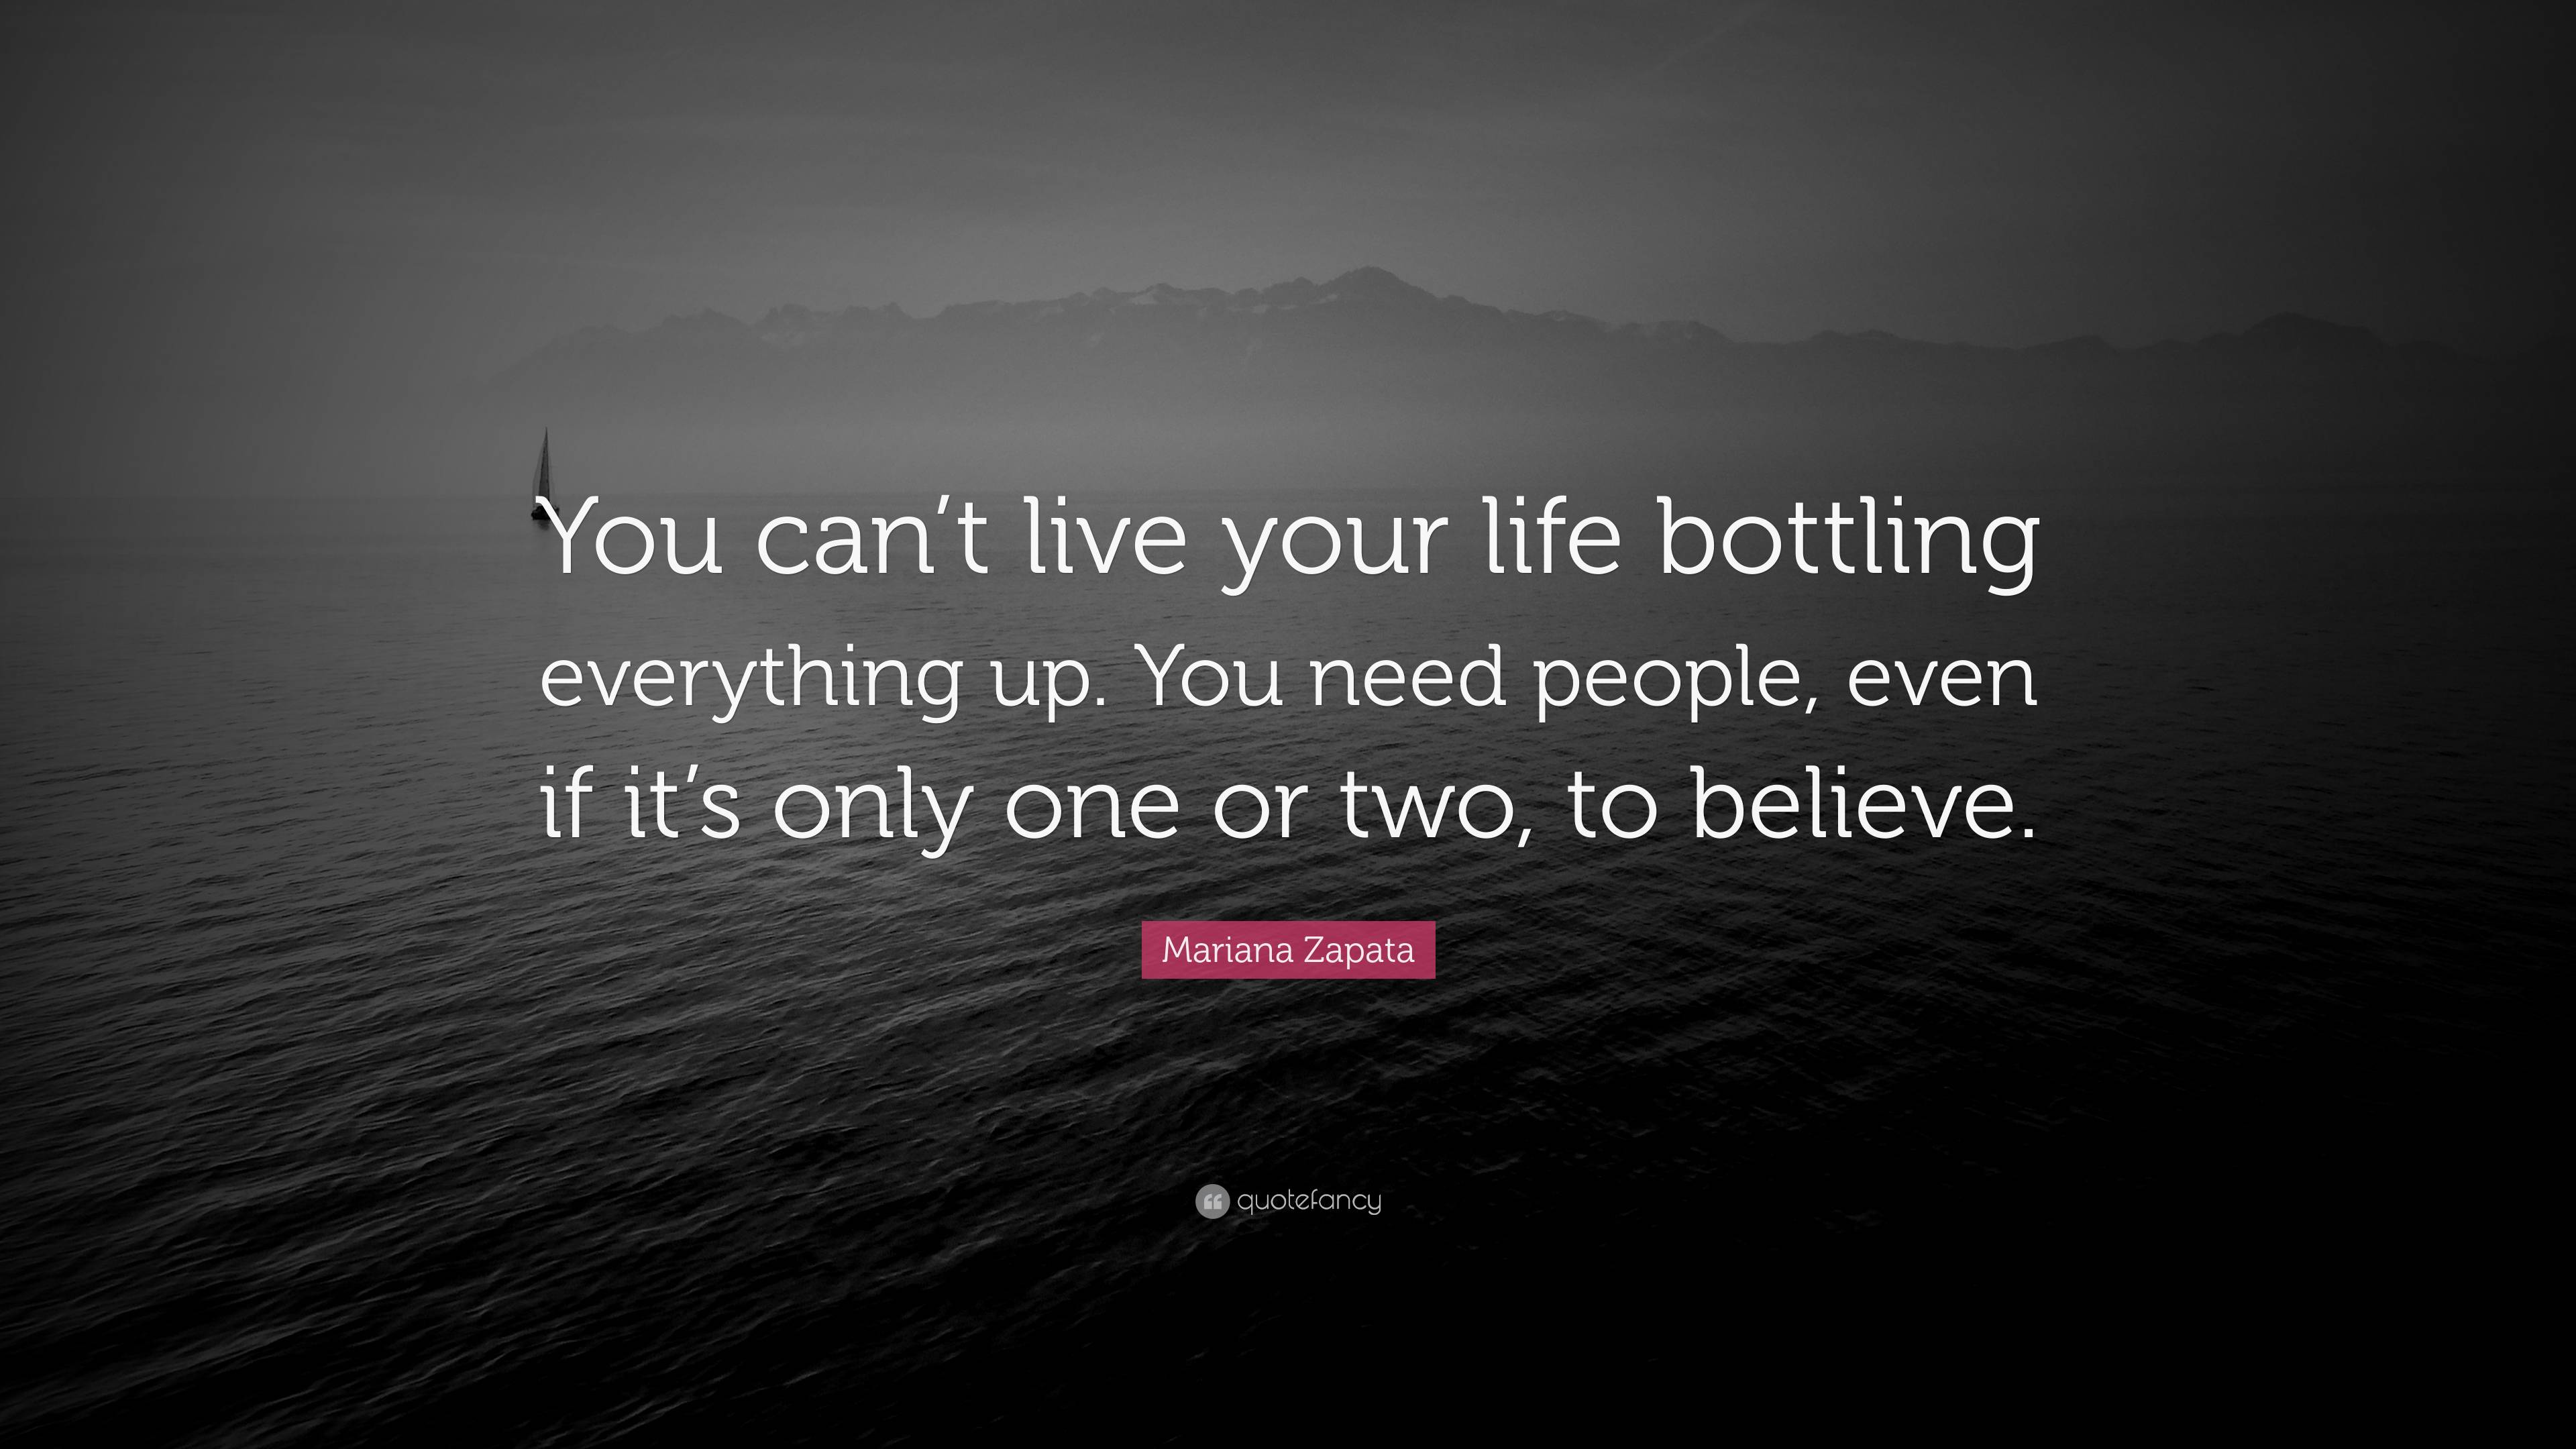 Mariana Zapata Quote: “You can’t live your life bottling everything up ...